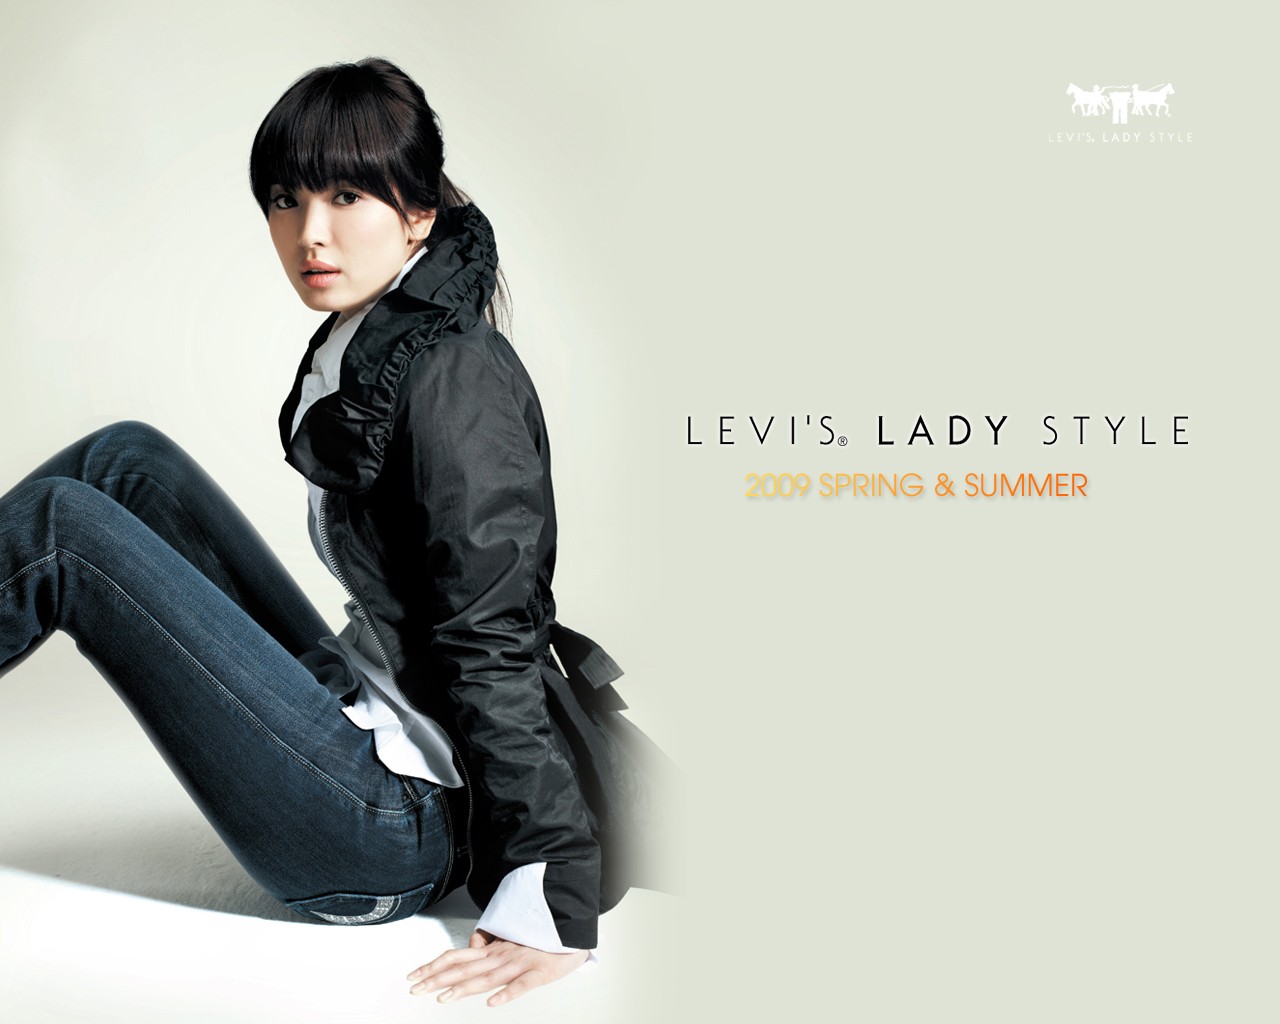 2009 Mujeres Levis Wallpapers #16 - 1280x1024